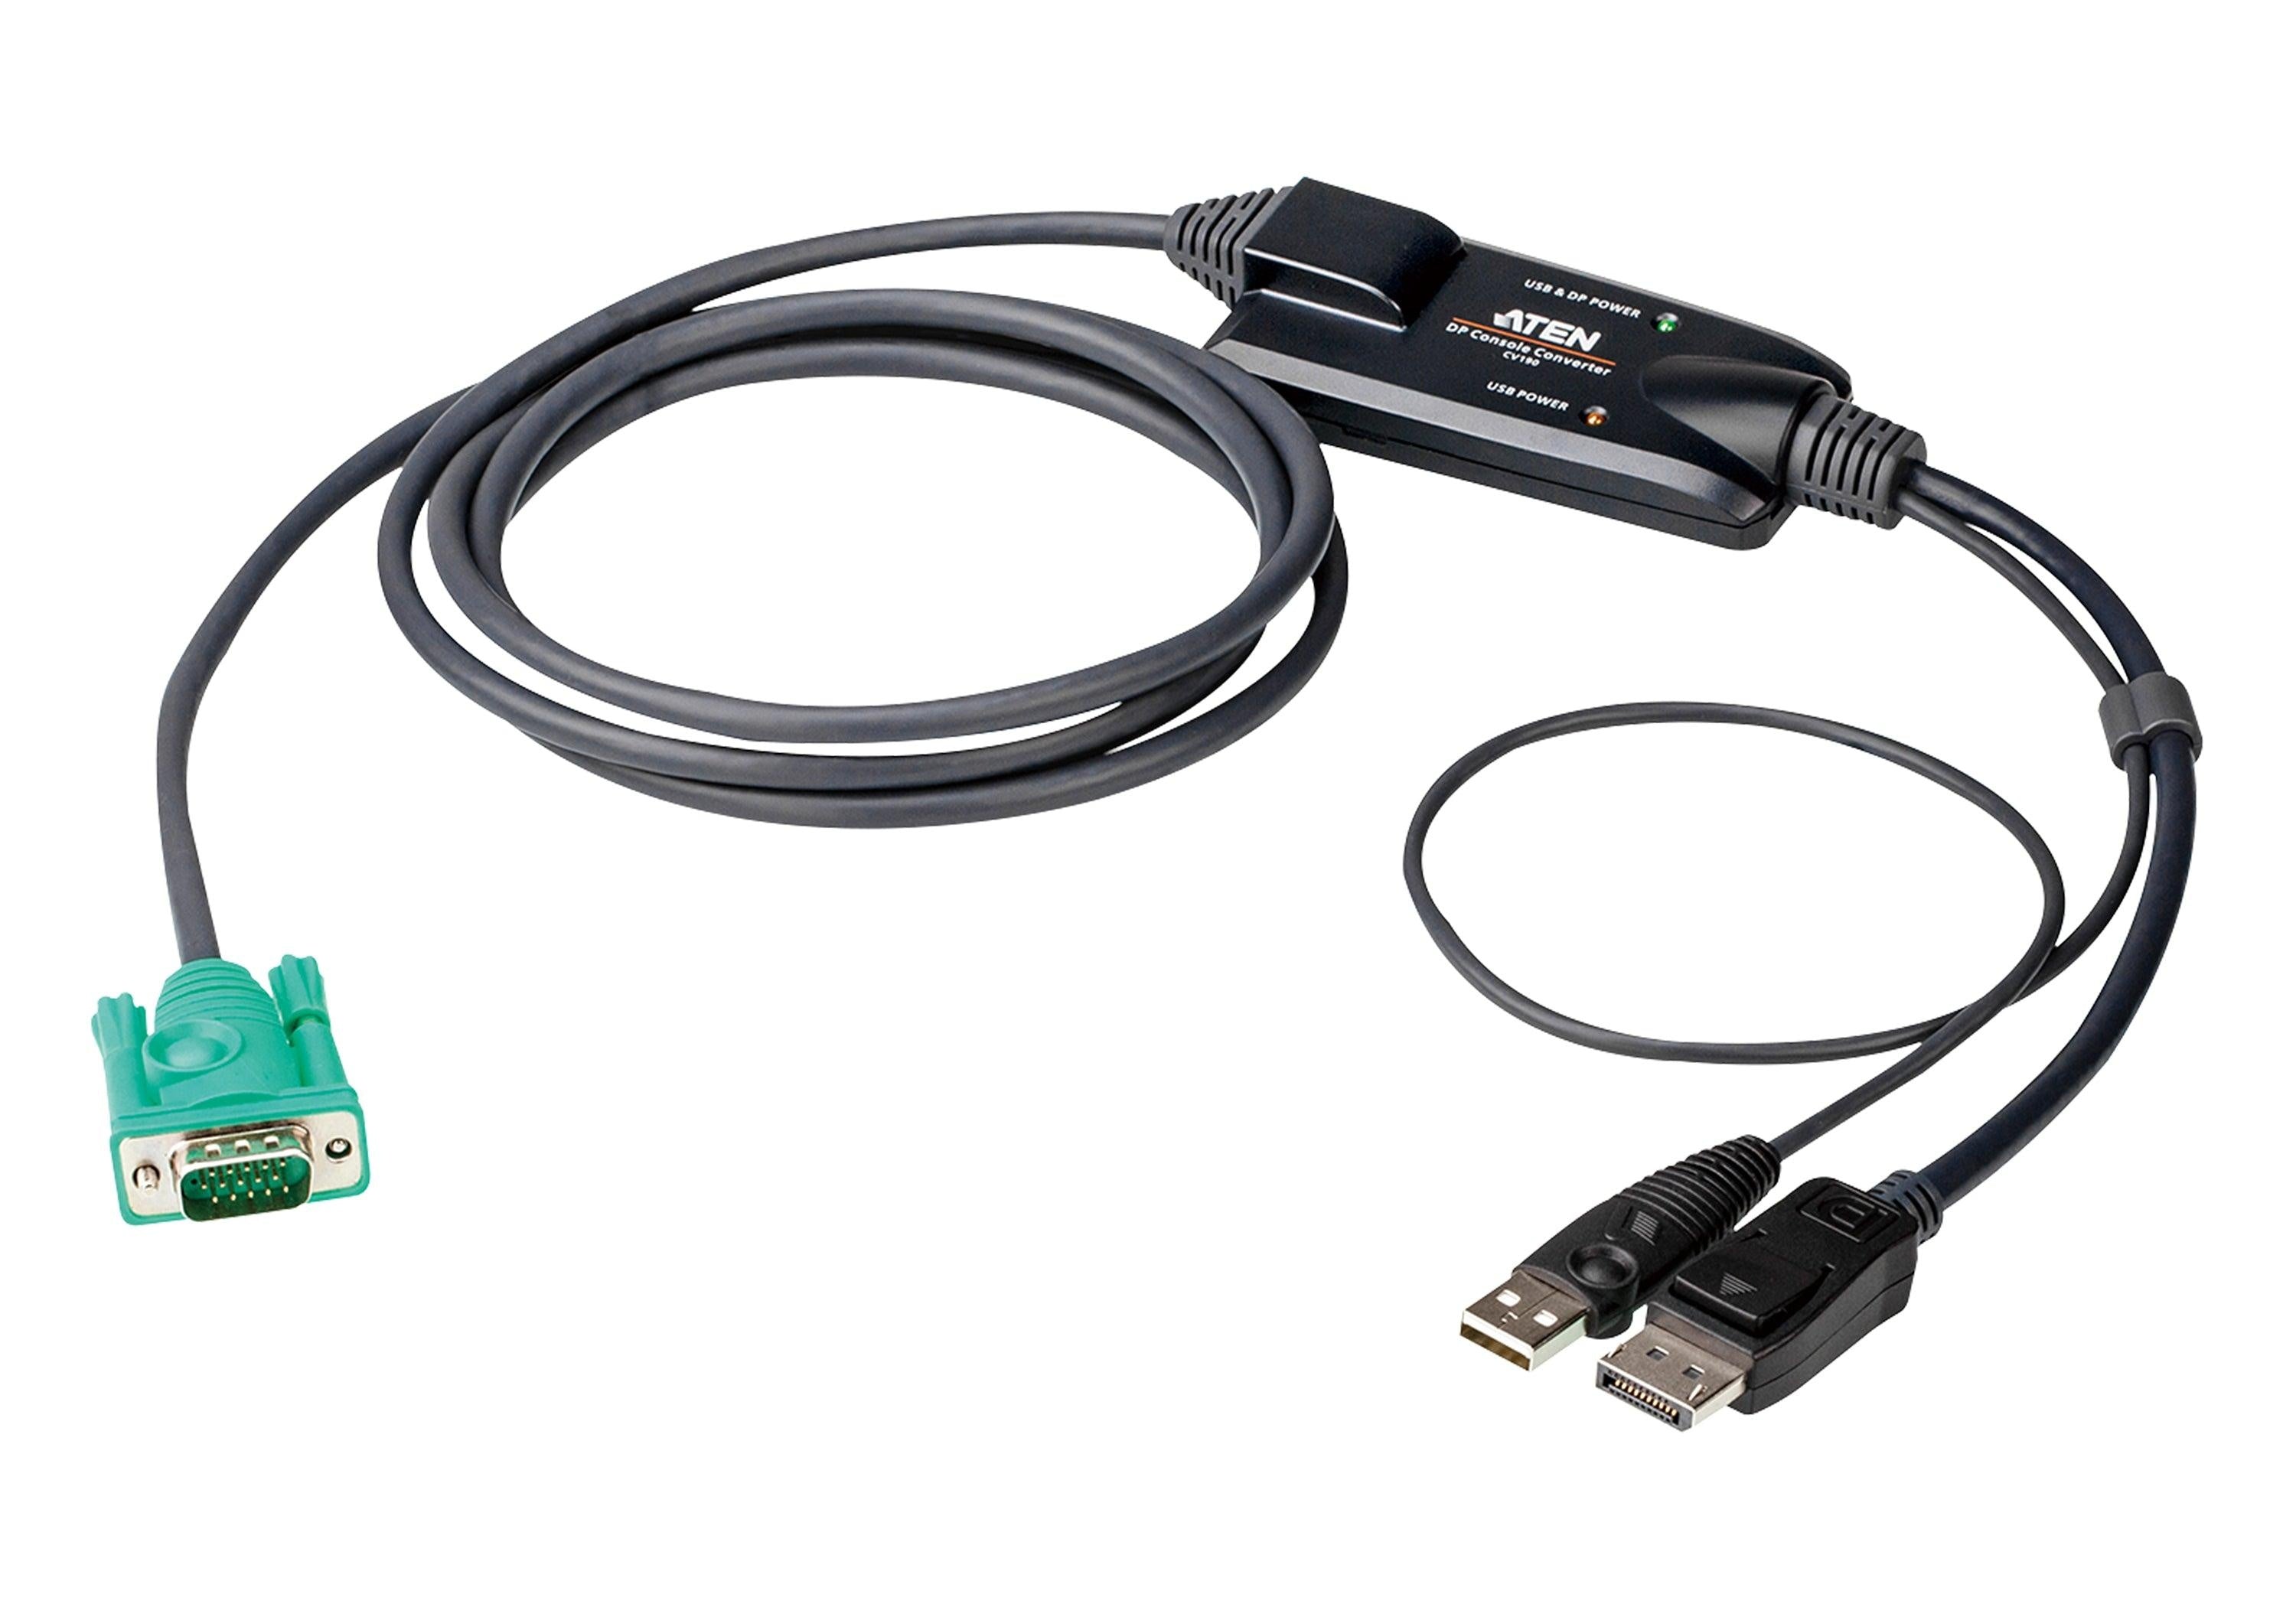 ATEN DisplayPort Console Converter, connects an Aten SPHD (VGA KVM) interface switch to a DisplayPort and USB PC, up to 1920 x 1080 @ 60 Hz, compliant ATEN